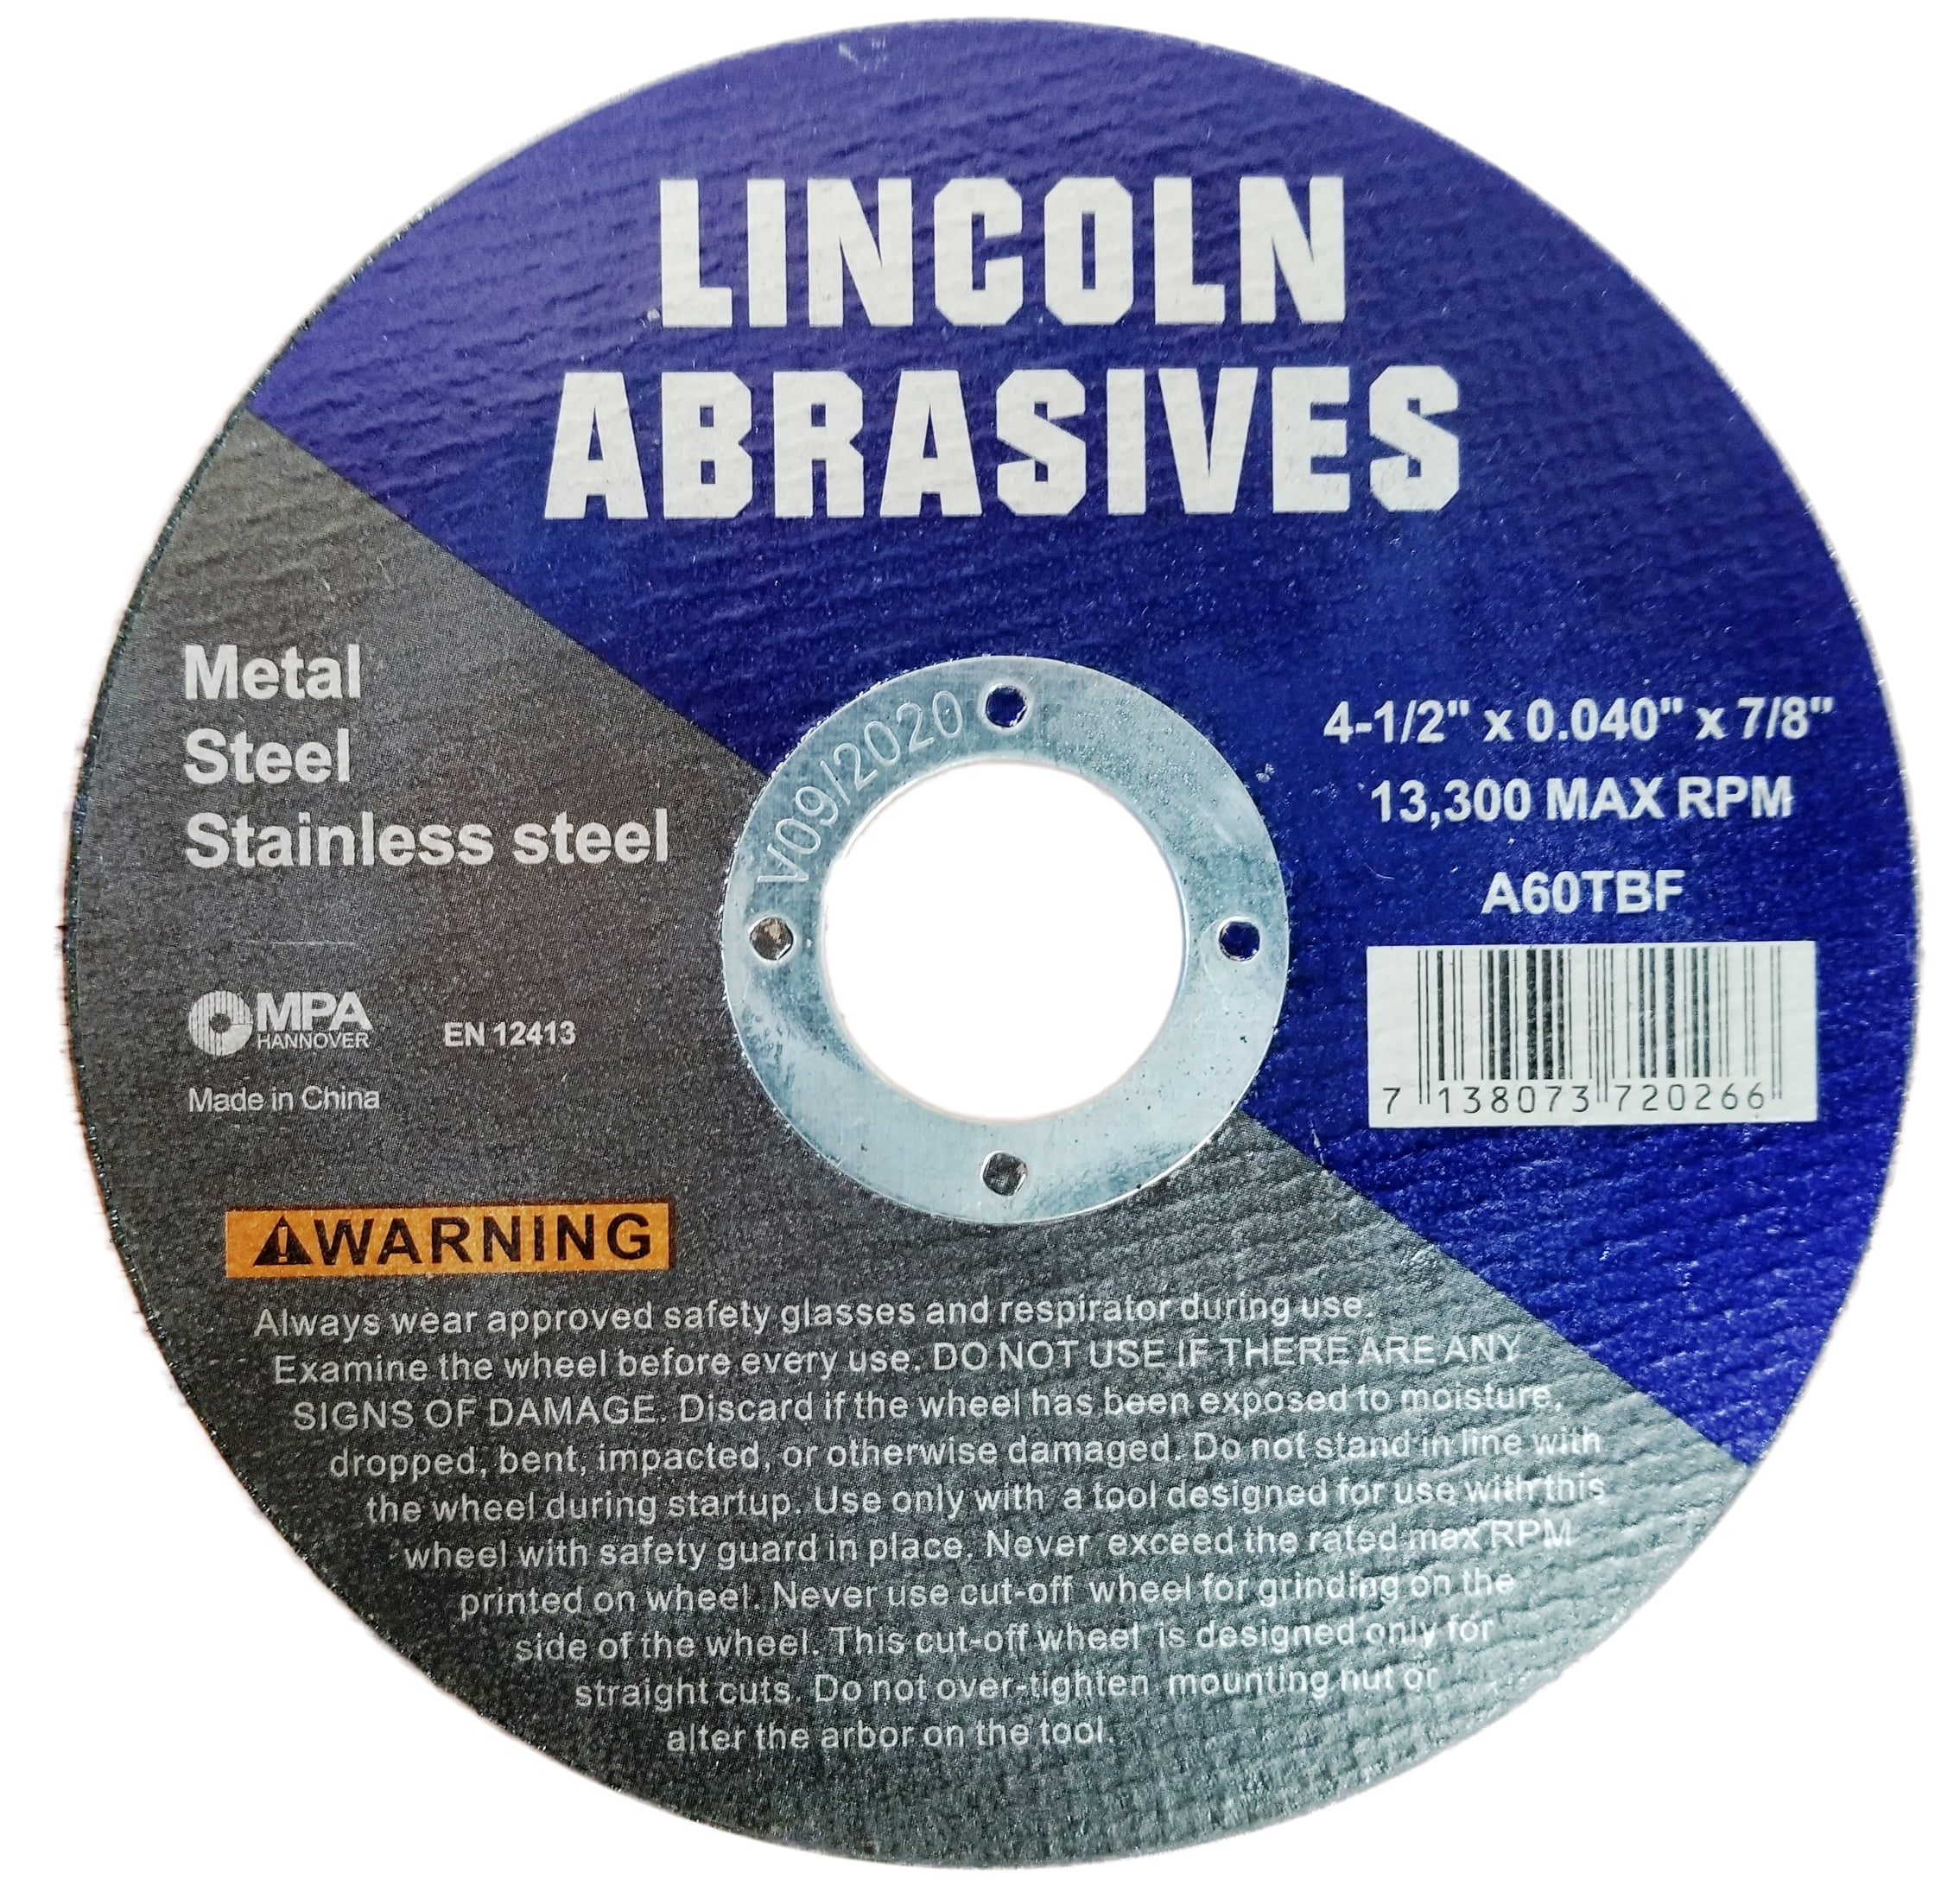 100 Industrial 4.5 x.040x7/8 Cut-off Wheel Stainless Steel Metal Cutting Disc